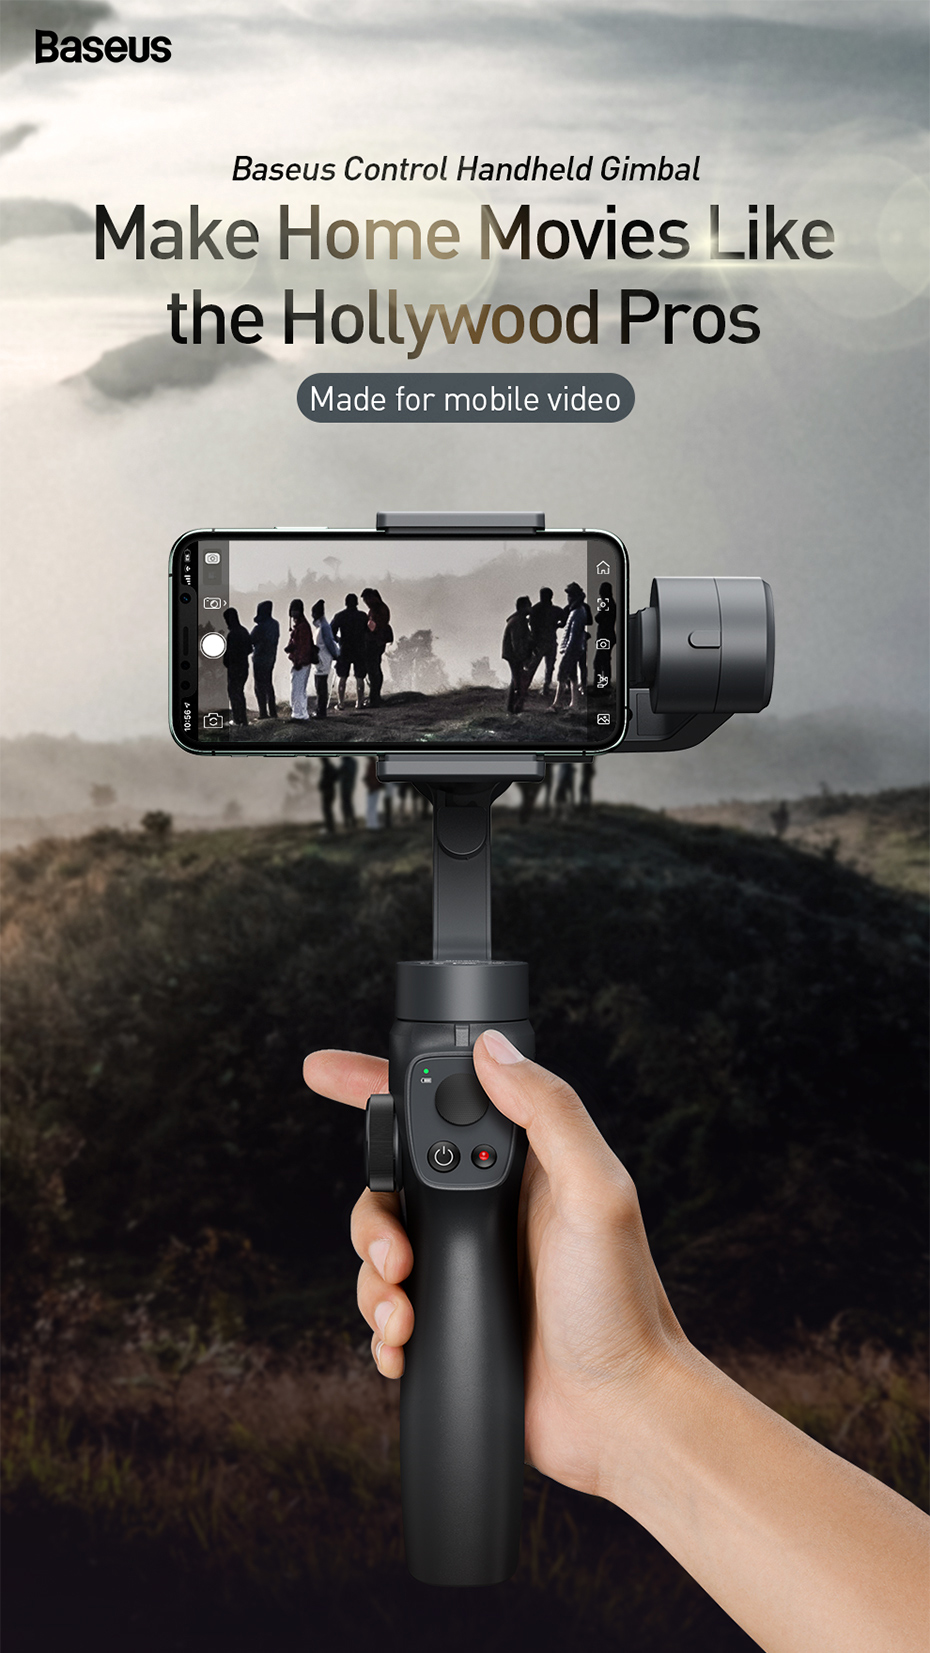 Baseus-3-Axis-Handheld-Gimbal-Stabilizer-bluetooth-Selfie-Stick-Outdoor-Holder-wFocus-Pull-Zoom-for--1671605-1